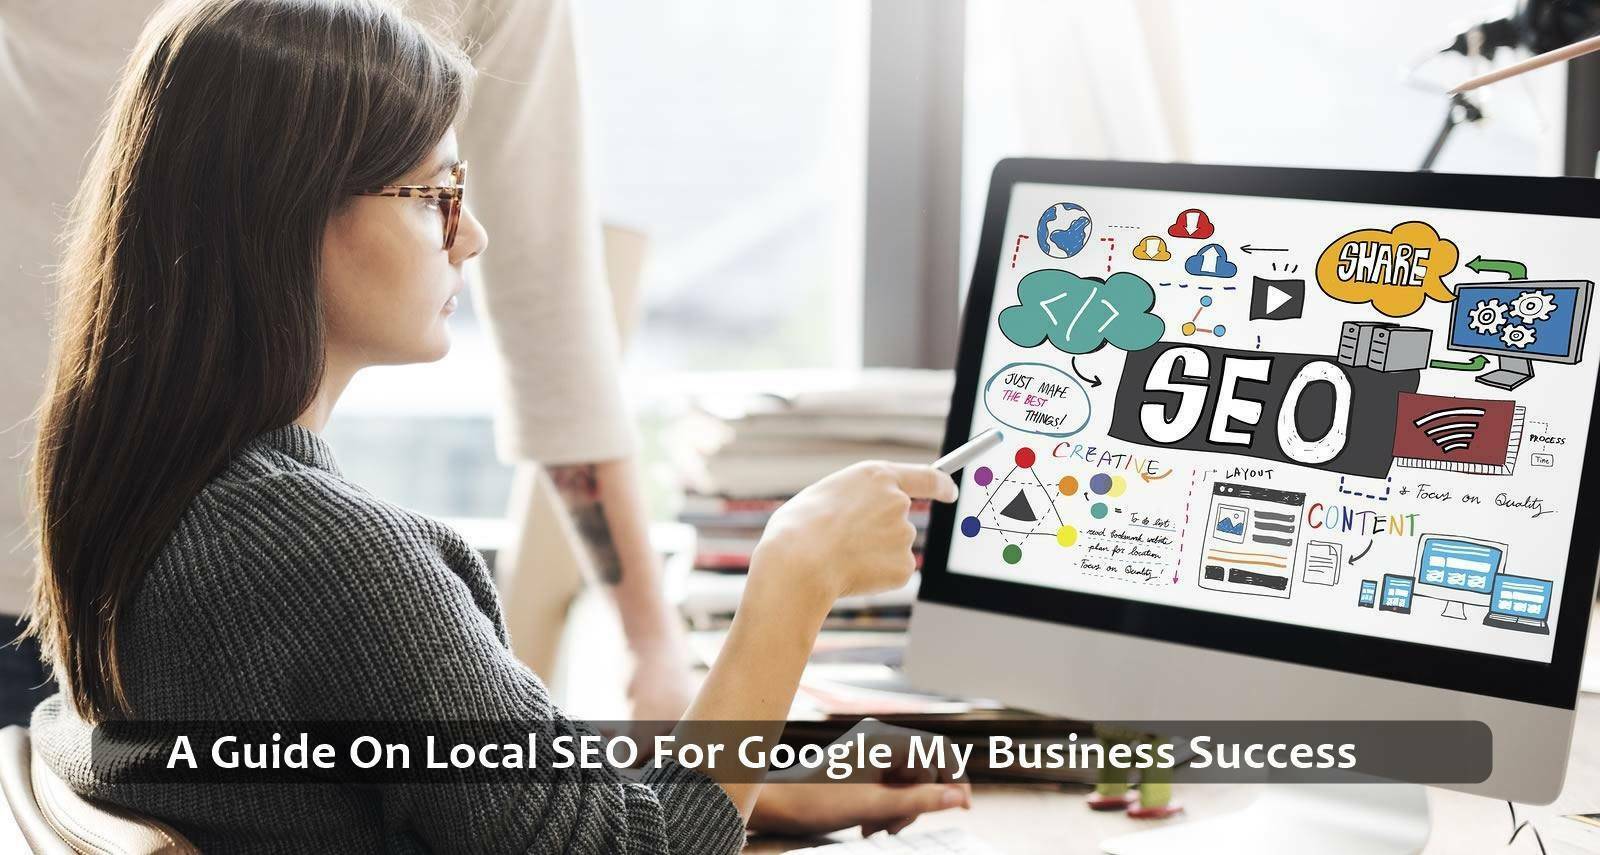 A Guide On Local SEO For Google My Business Success